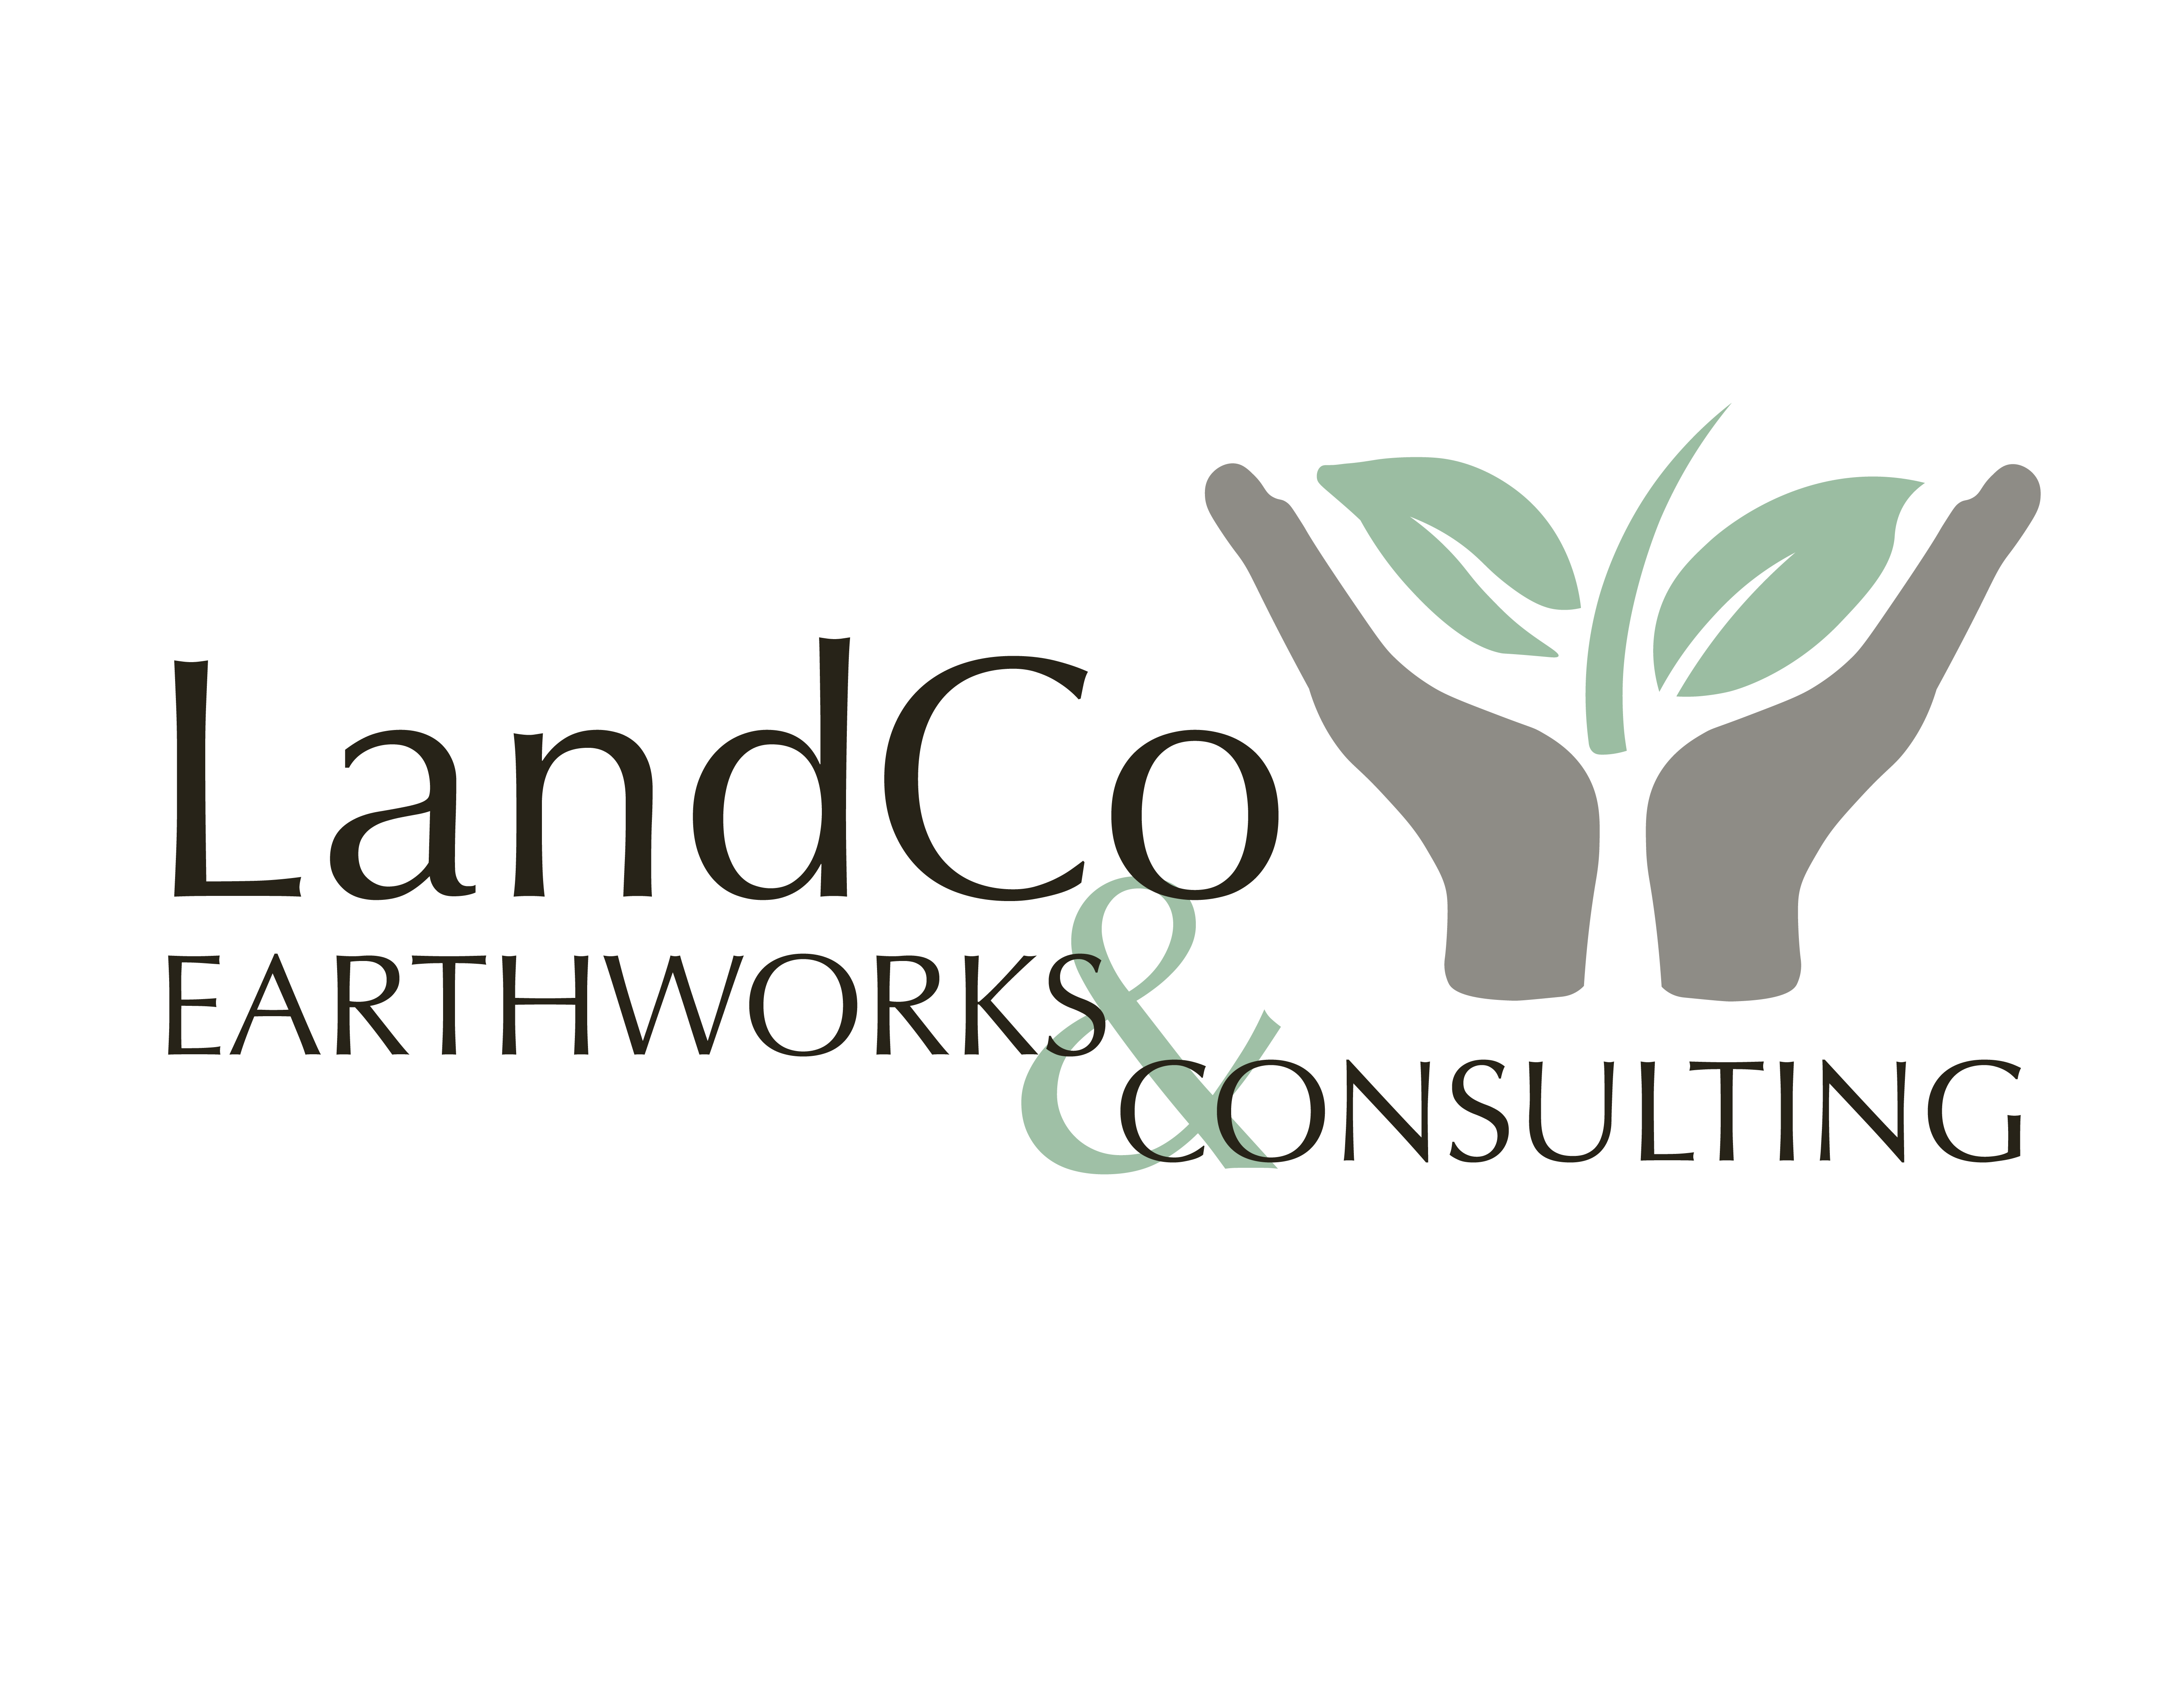 LandCo Earthworks & Consulting Interactive Database